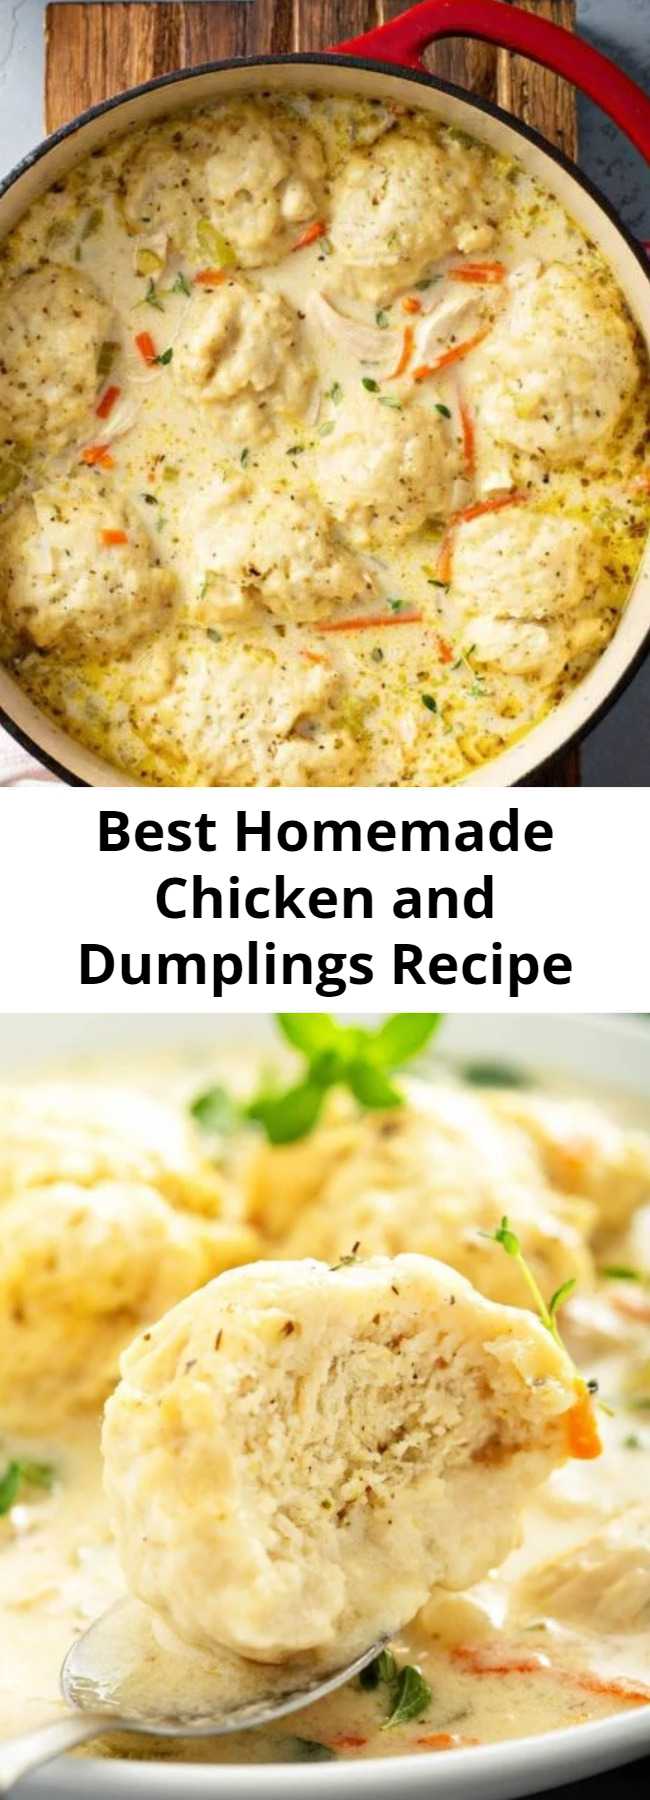 Best Easy Homemade Chicken and Dumplings Recipe - This easy recipe for my family’s favorite creamy Homemade Chicken and Dumplings is loaded with big fluffy dumplings that are made from scratch in just minutes! #ChickenAndDumplings #Dumplings #ComfortFood #Chicken #ChickenSoup #Soup #Dumplings #SouthernFood